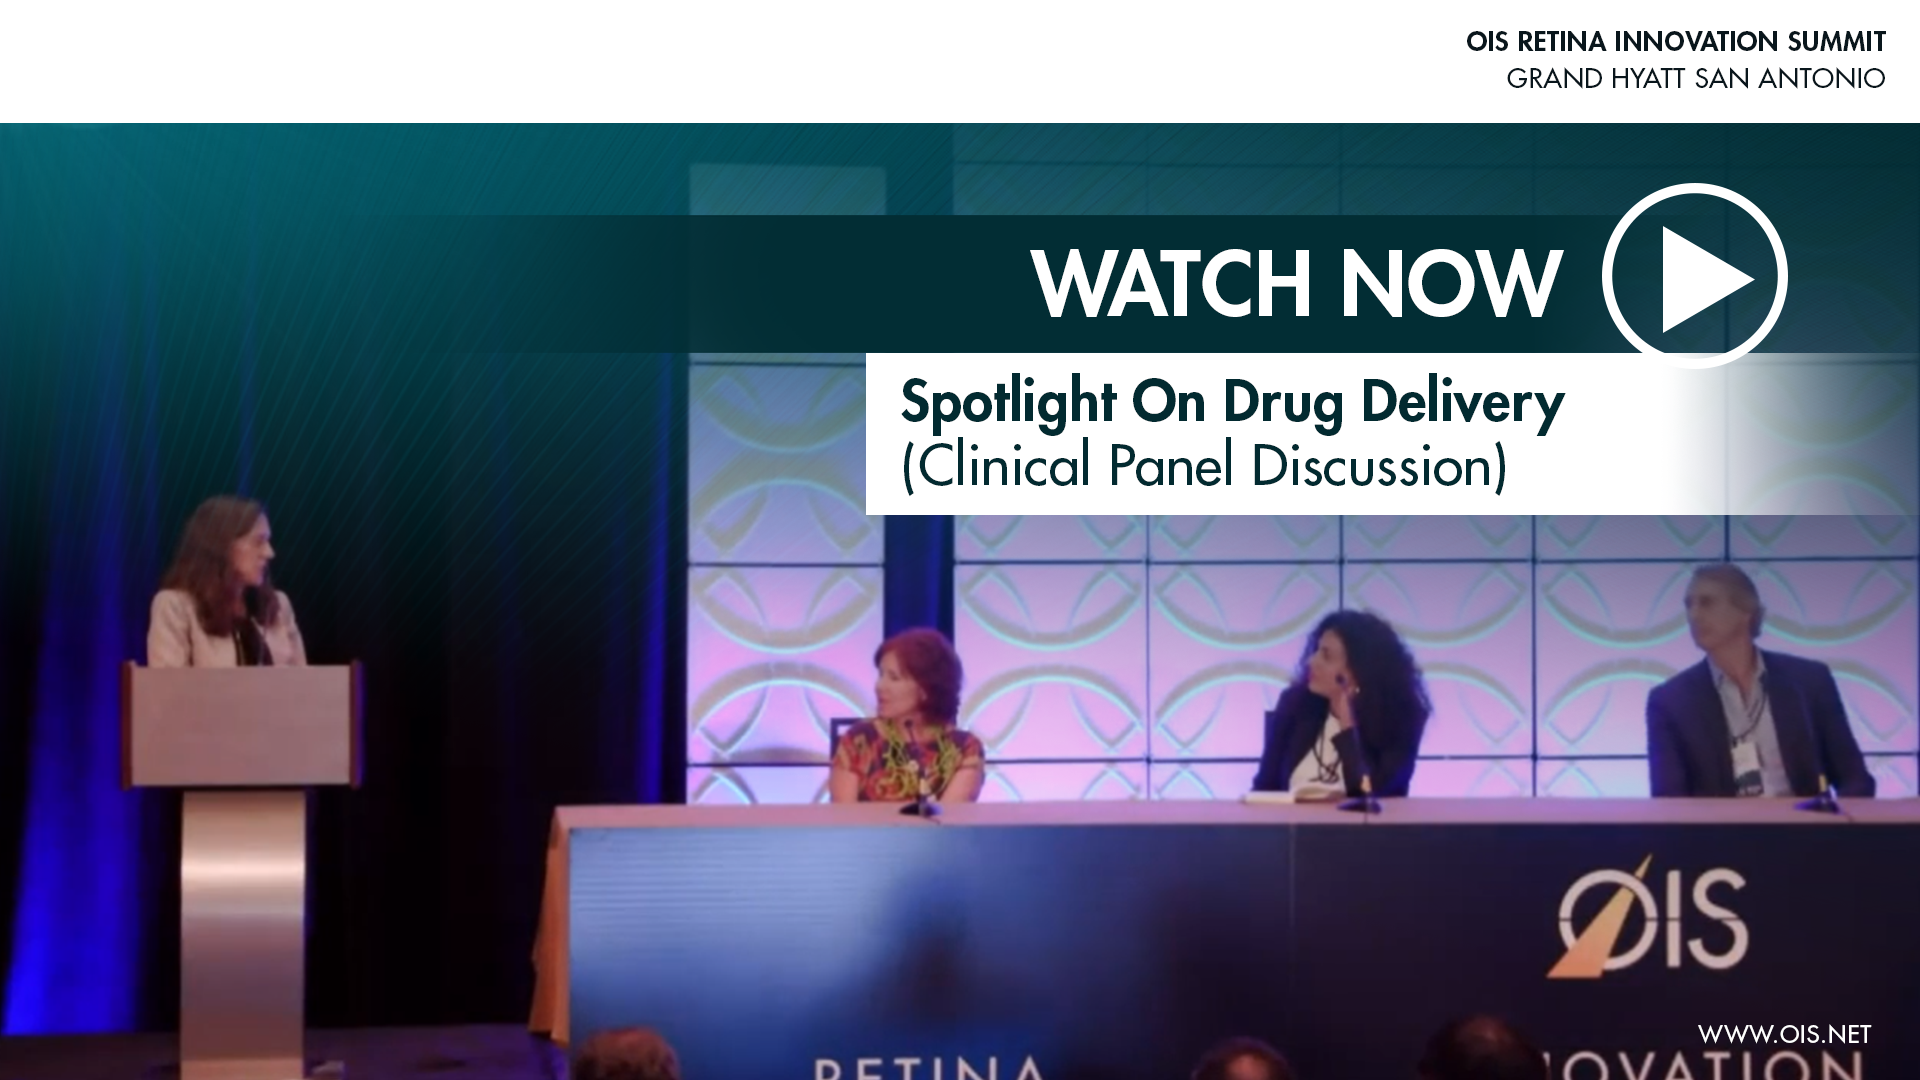 Clinical Panel Discussion - Spotlight On Drug Delivery